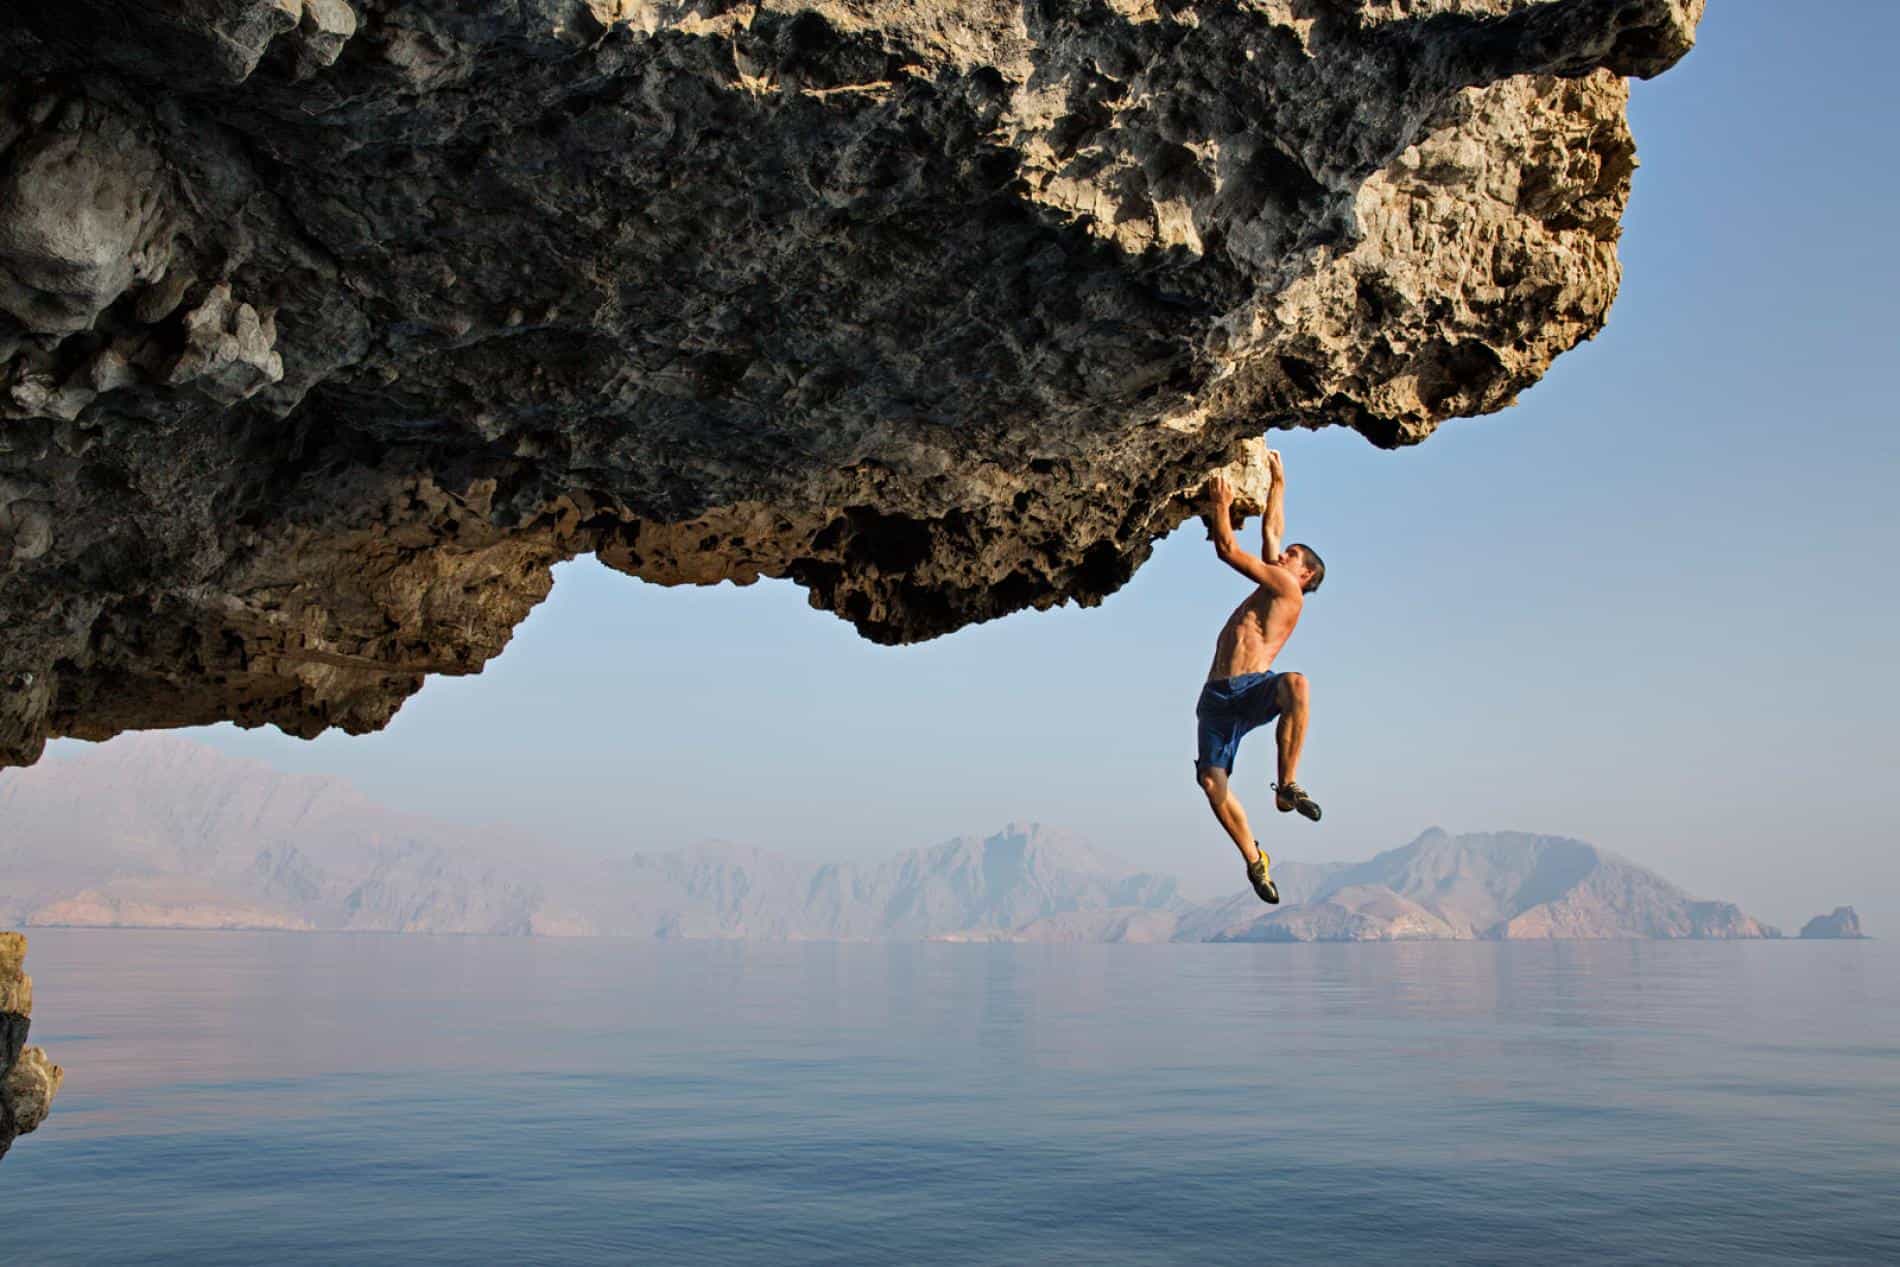 Alex Honnold don't care about fear and death